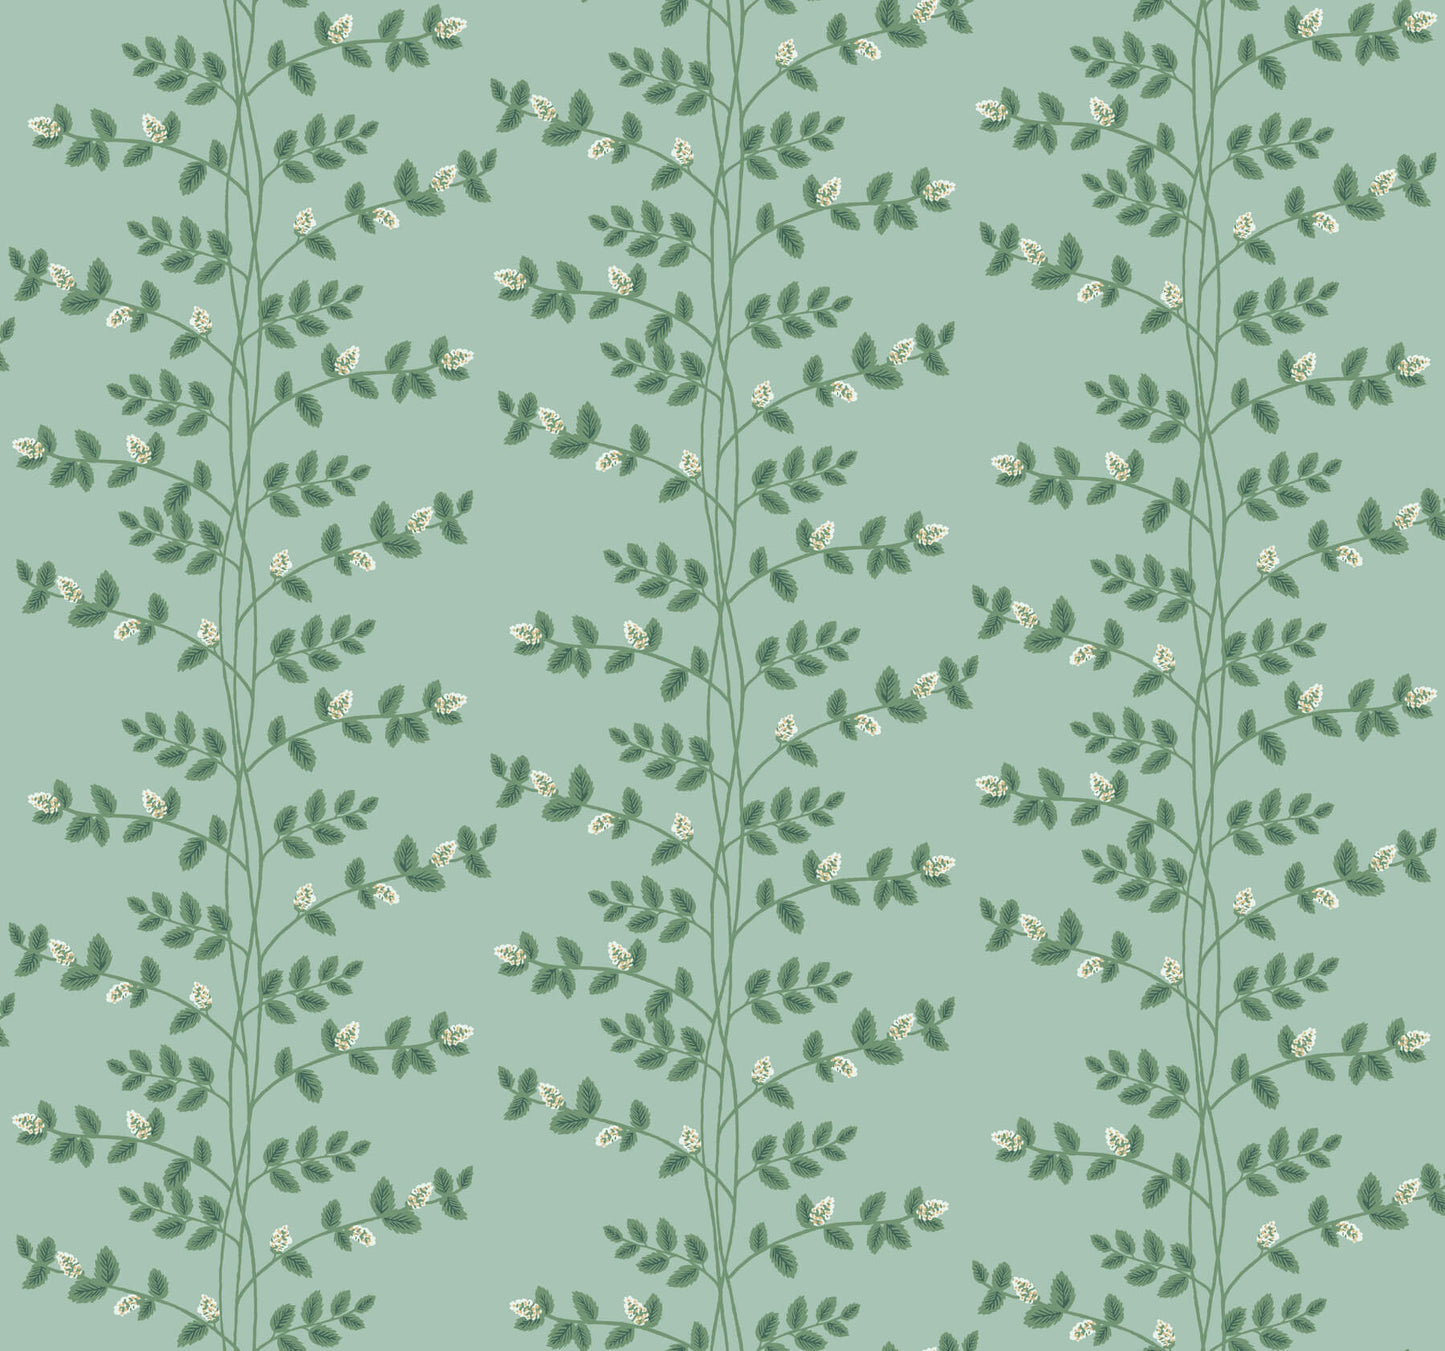 Rifle Paper Co. 3rd Edition Climbing Vine Wallpaper - Soft Teal